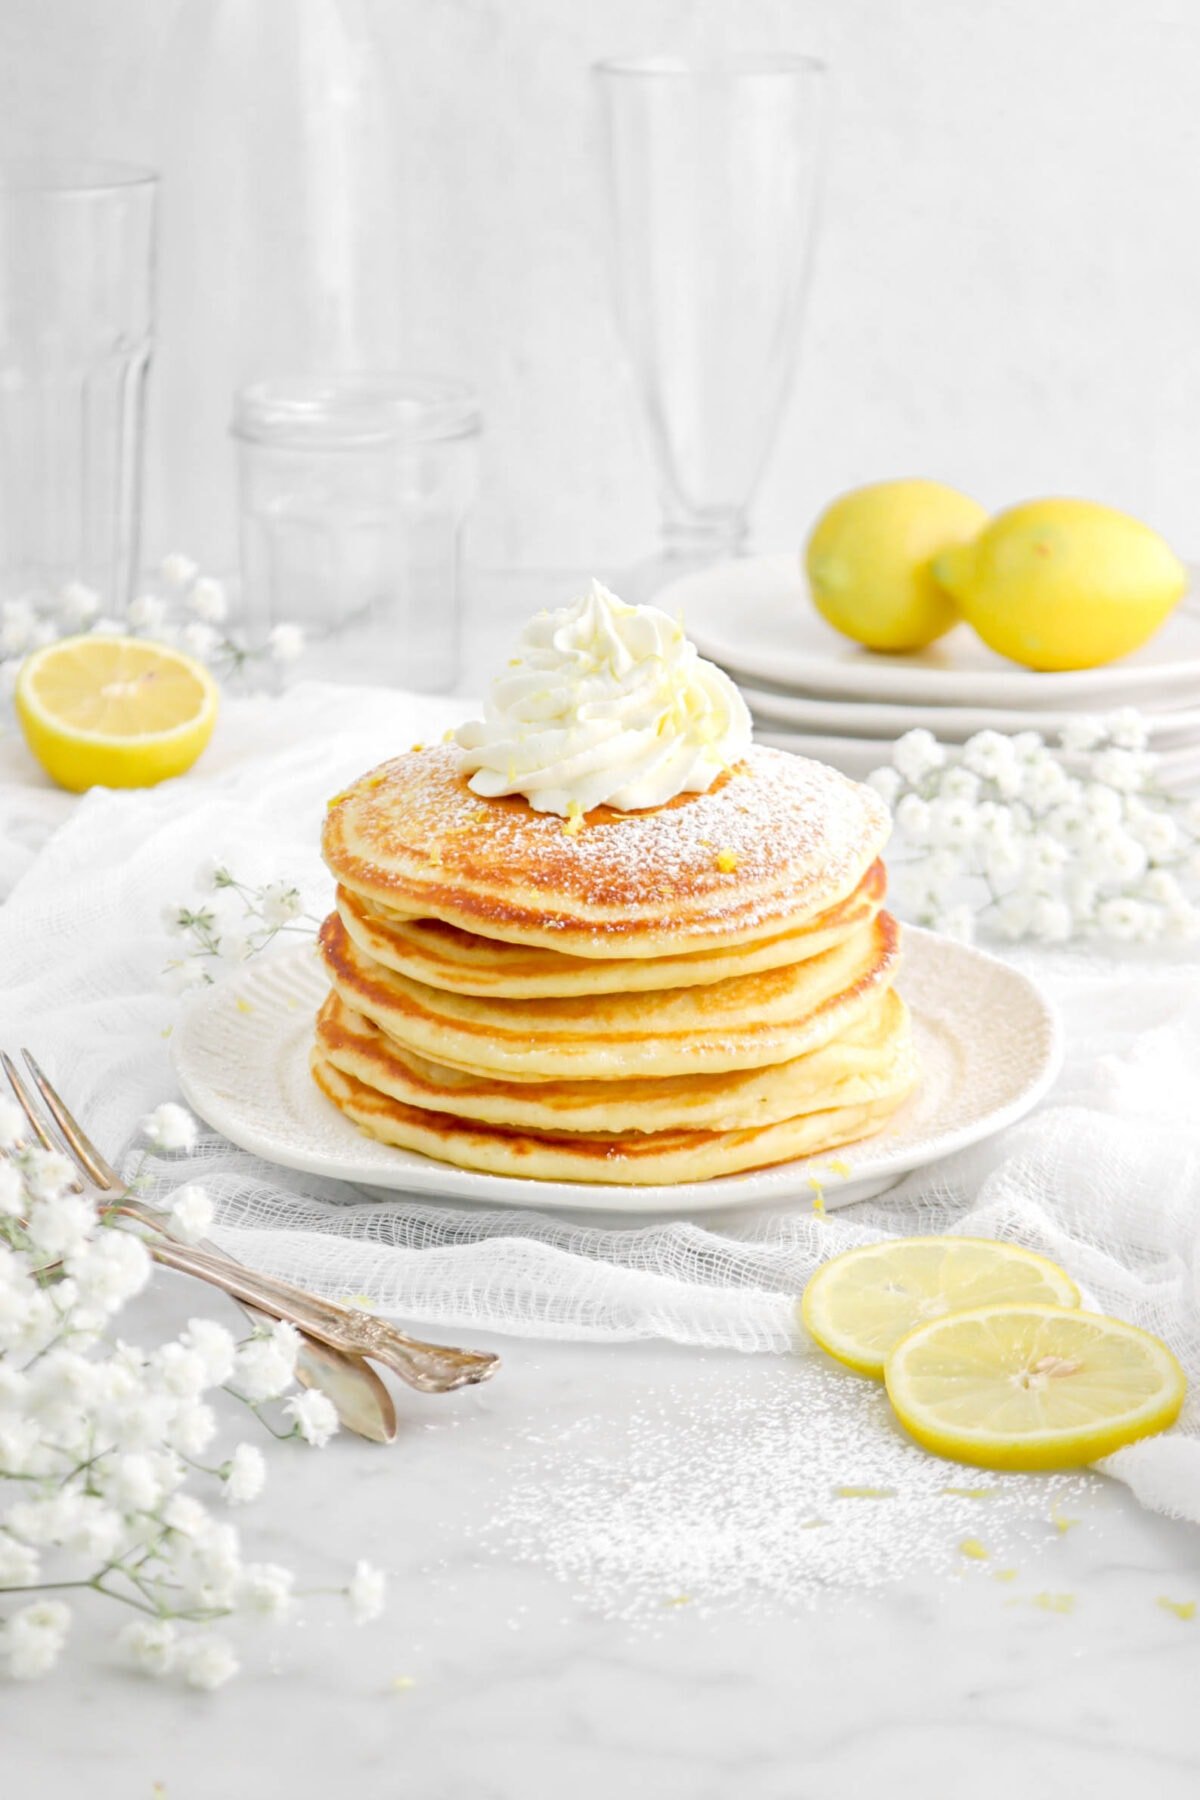 lemon ricotta pancakes stacked on white plate with whipped cream and powdered sugar on top, flowers, two forks, and lemon slices beside